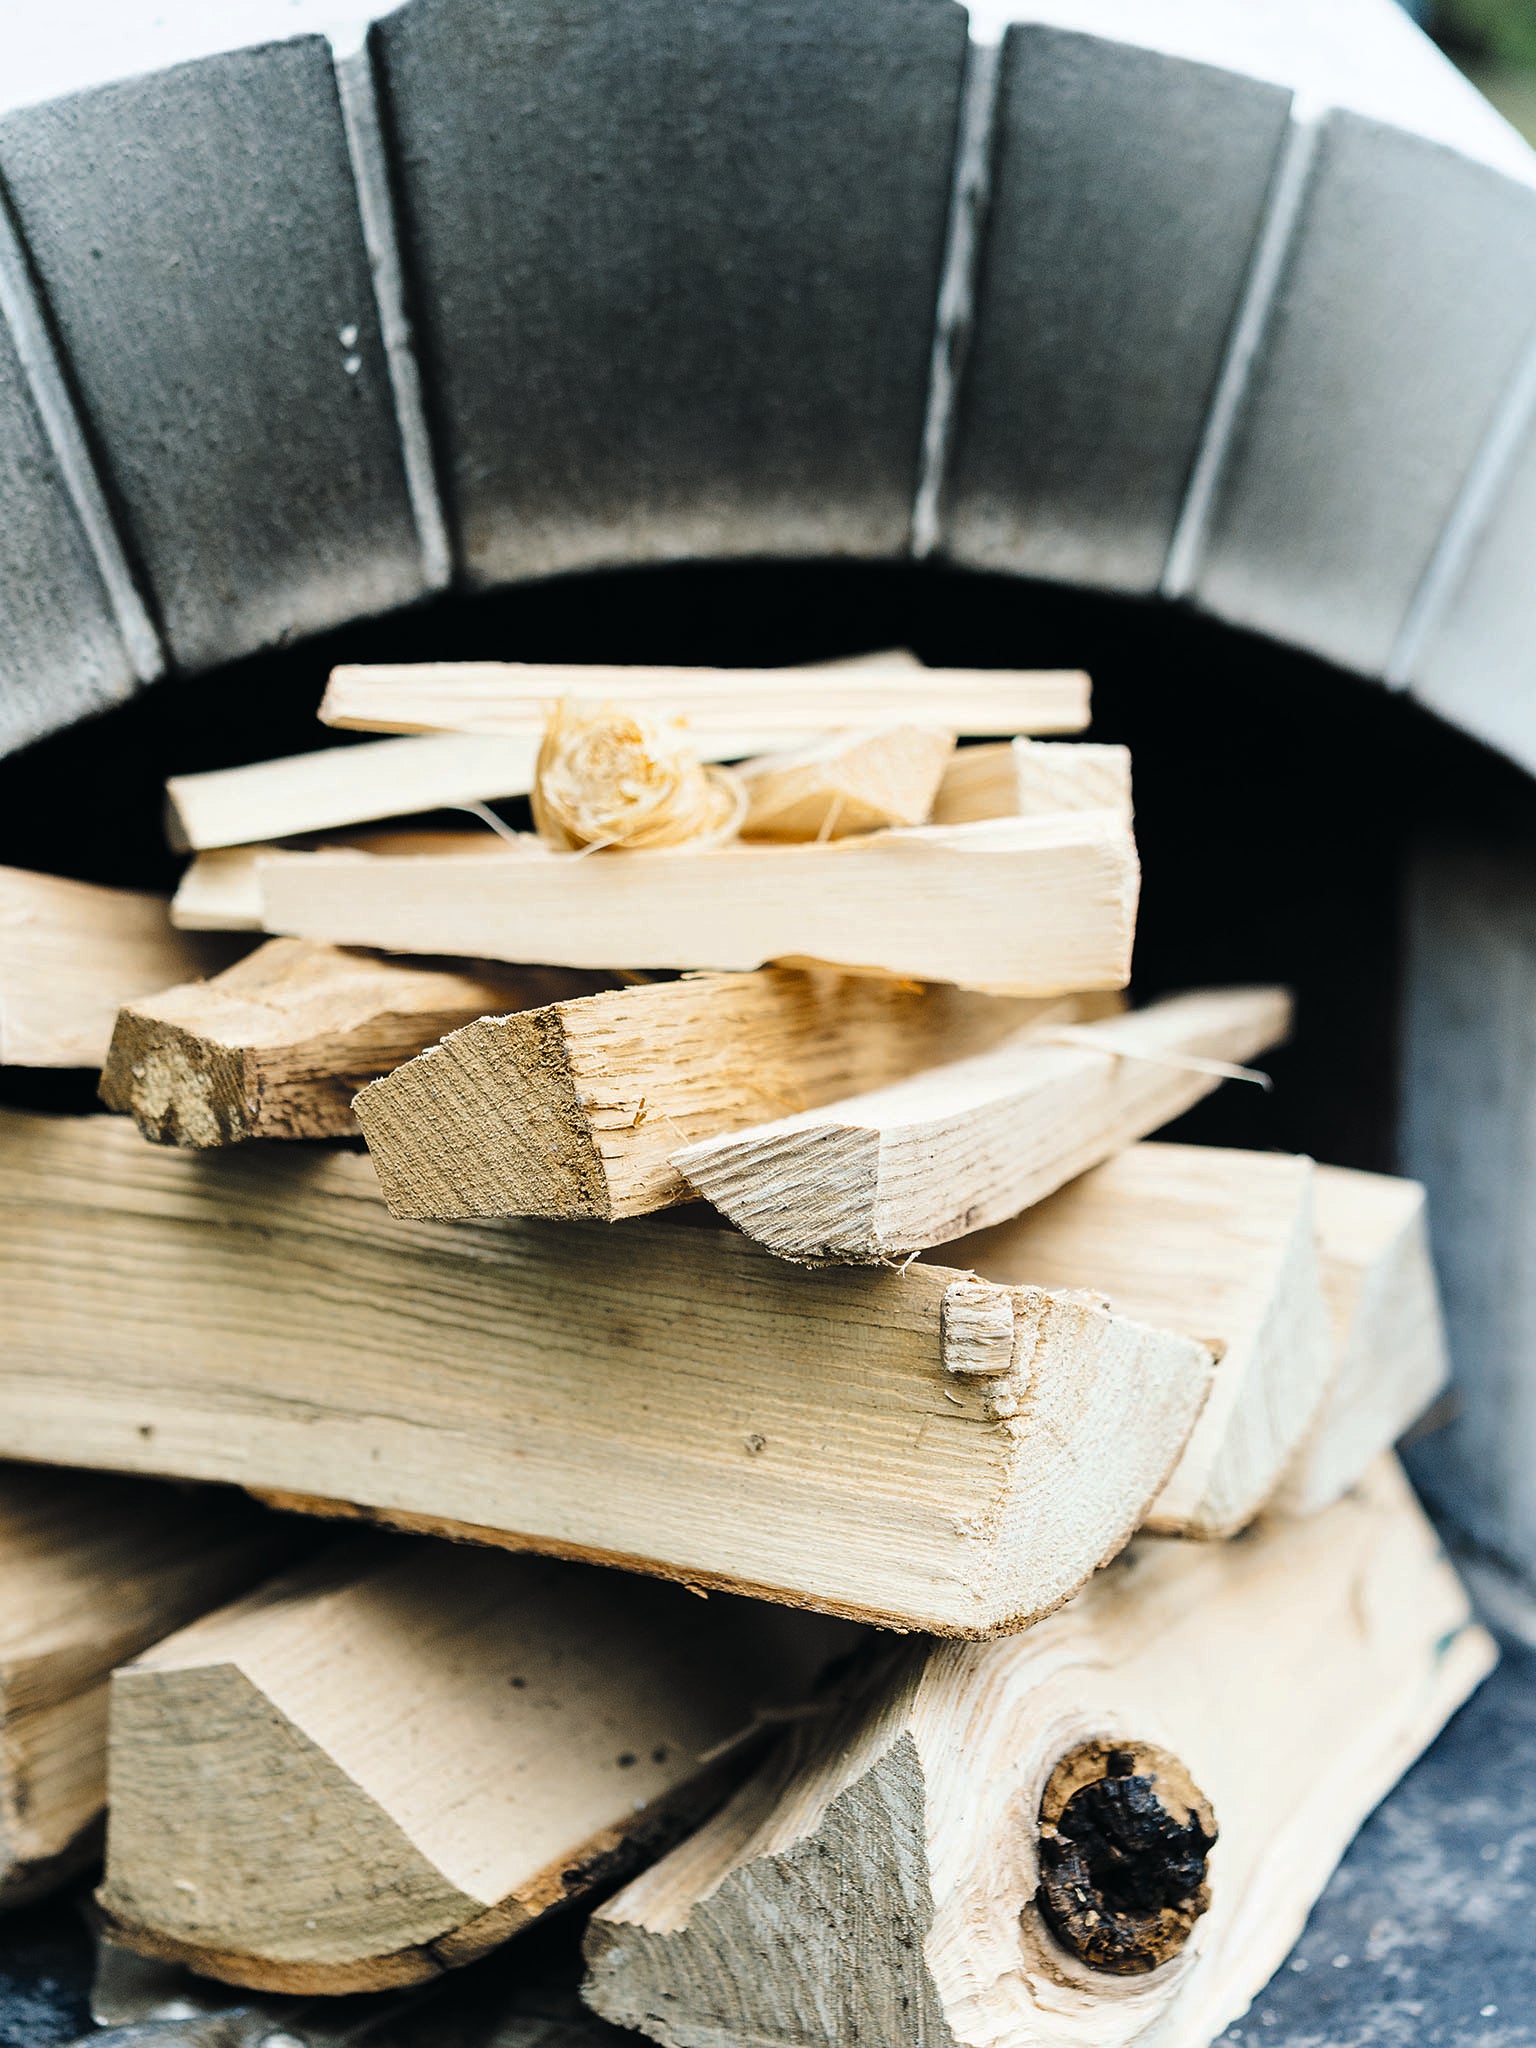 Using a wood-fire oven frees you from the restrictions of normal cooking, exact timings and recipes become less important as your senses take over